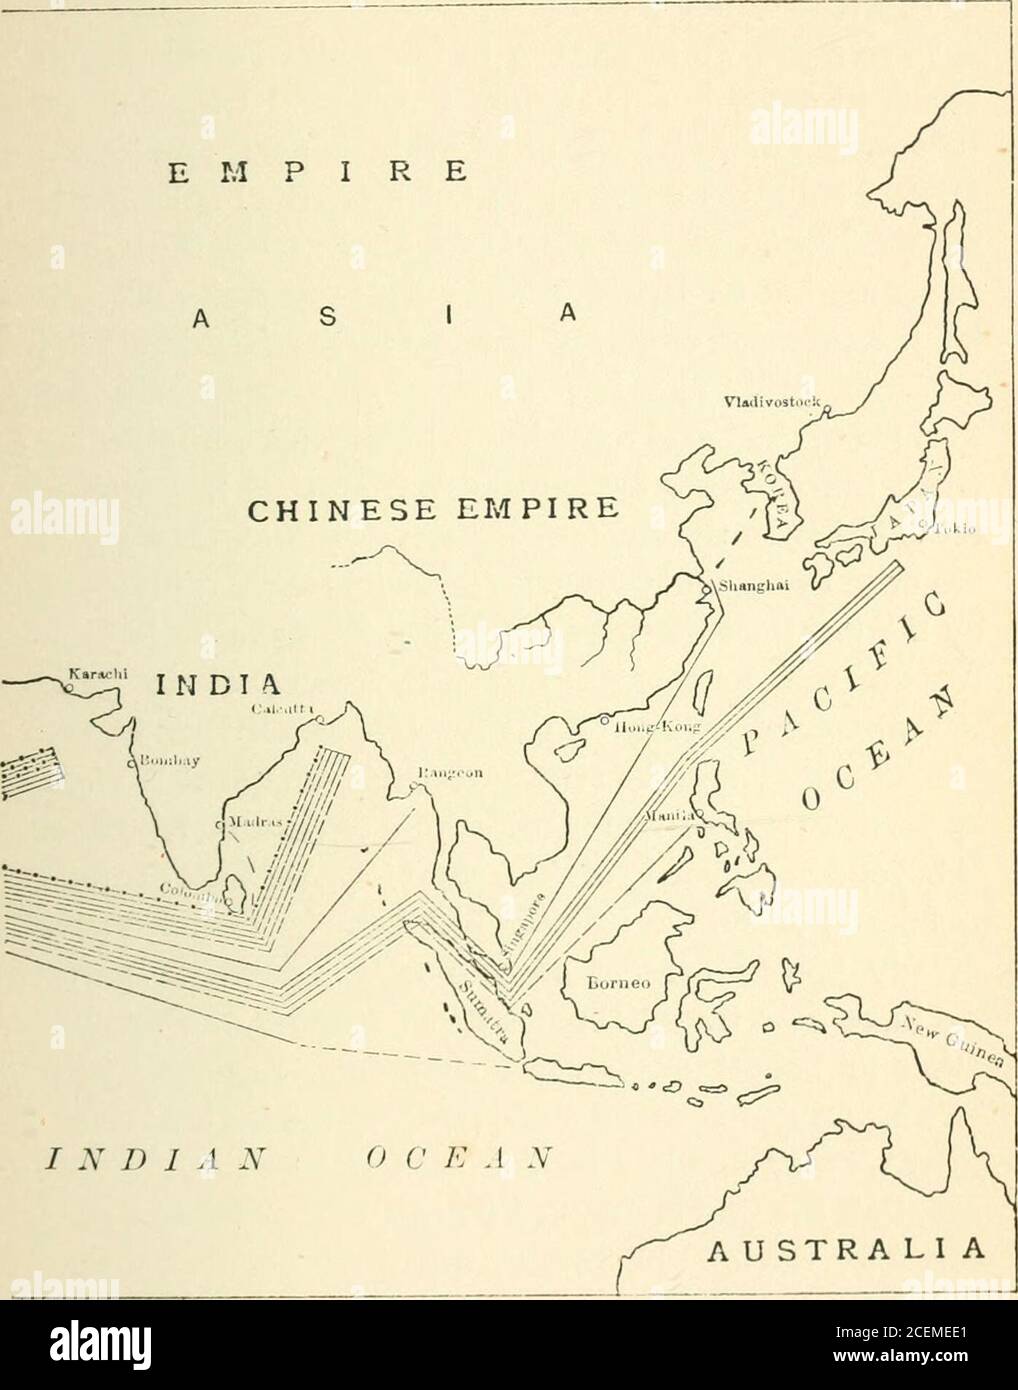 Seaways of the empire; notes on the geography of transport. ports of the  United Kingdom, with cargoor in ballast, for the Red Sea, the Indian Ocean,  and theFar East. The ships